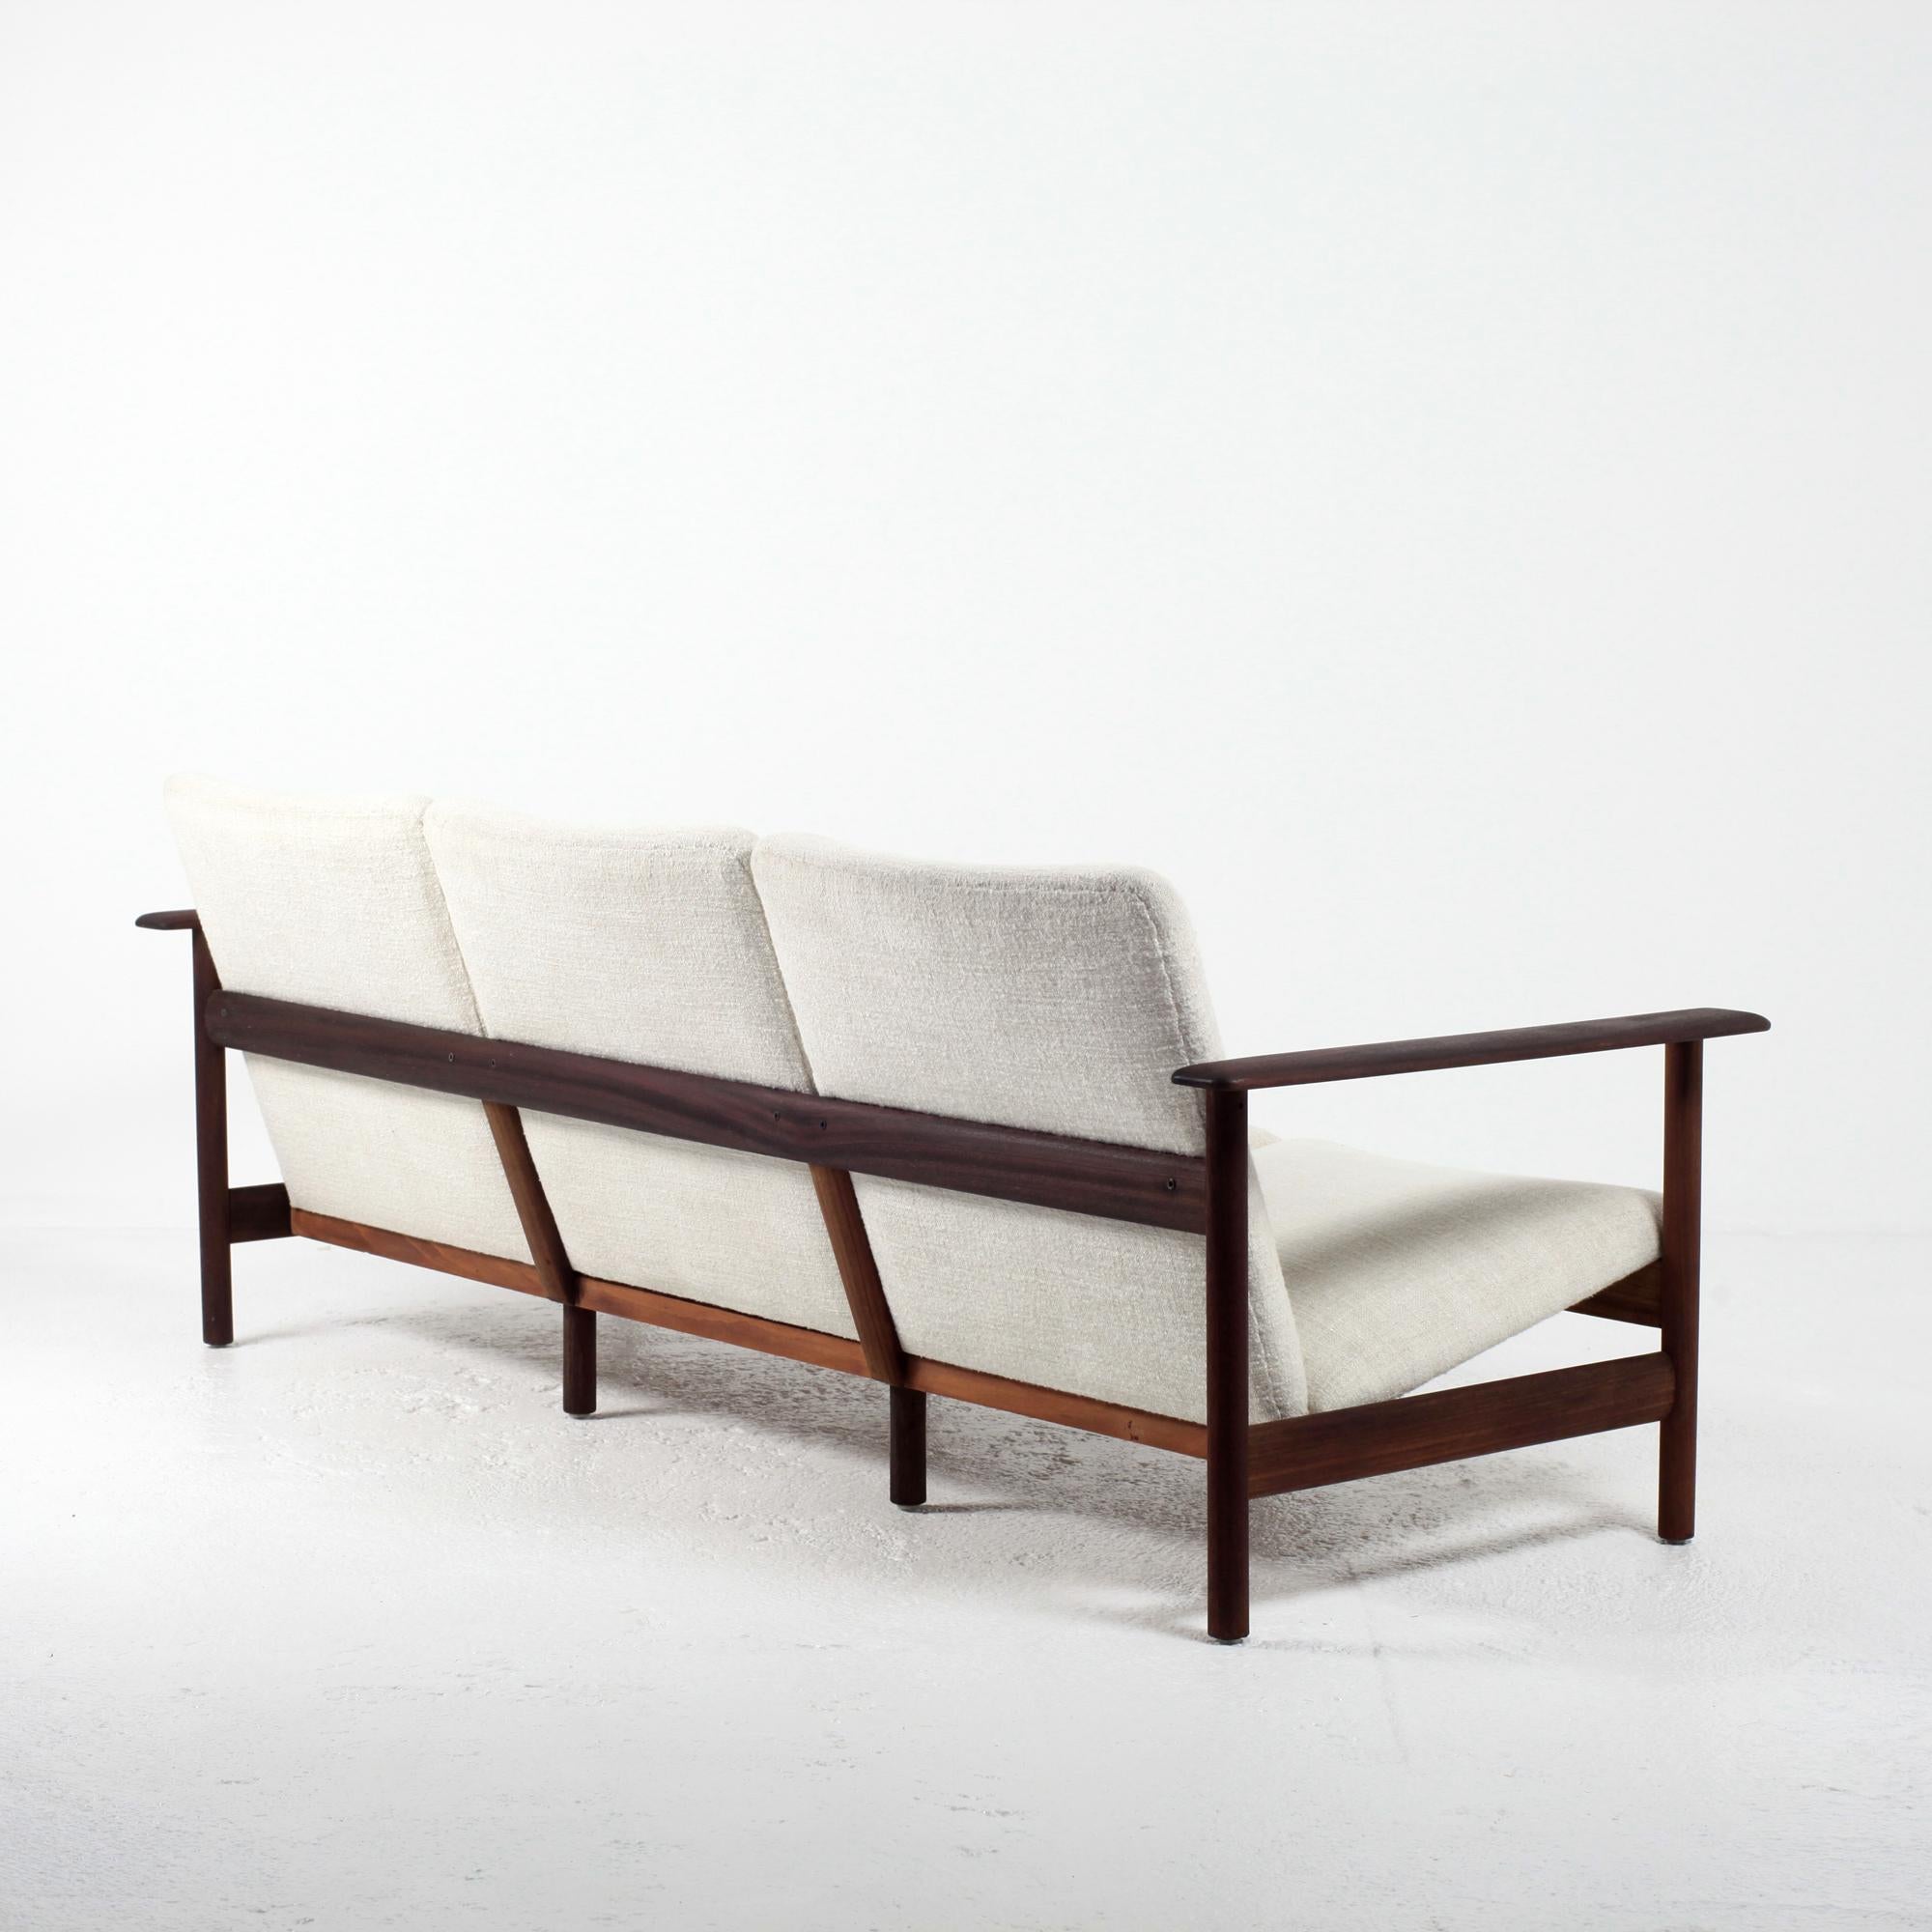 Mid-Century Modern Steiner Sofa Solid Wood Frame and Pierre Frey Fabric, France, 1960s For Sale